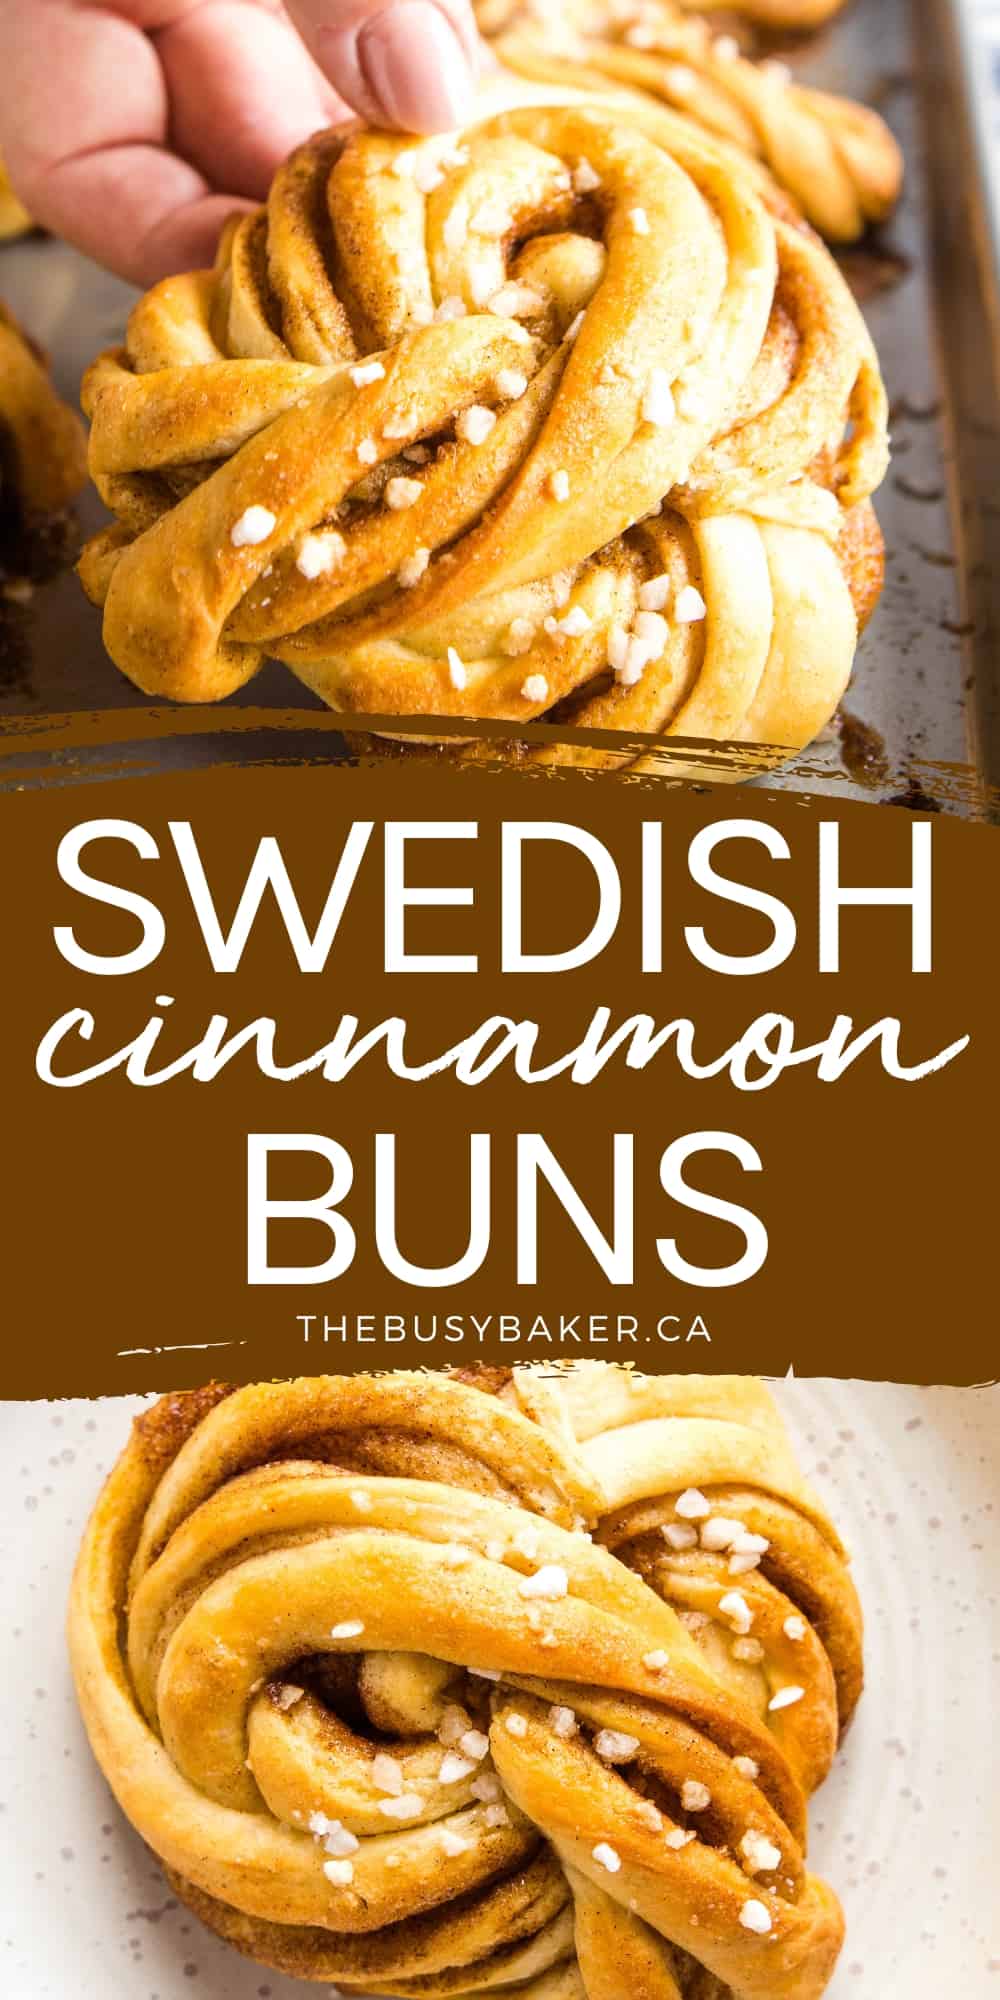 These Swedish Cinnamon Buns (Kanelbullar) are the perfect sweet treat made from a soft cardamom-infused dough with a buttery cinnamon cardamom filling! Recipe from thebusybaker.ca! #cinnamonbuns #swedishcinnamonbuns #kanelbullar #christmas #christmasbuns #swedishrecipe #european #cinnamontwist via @busybakerblog